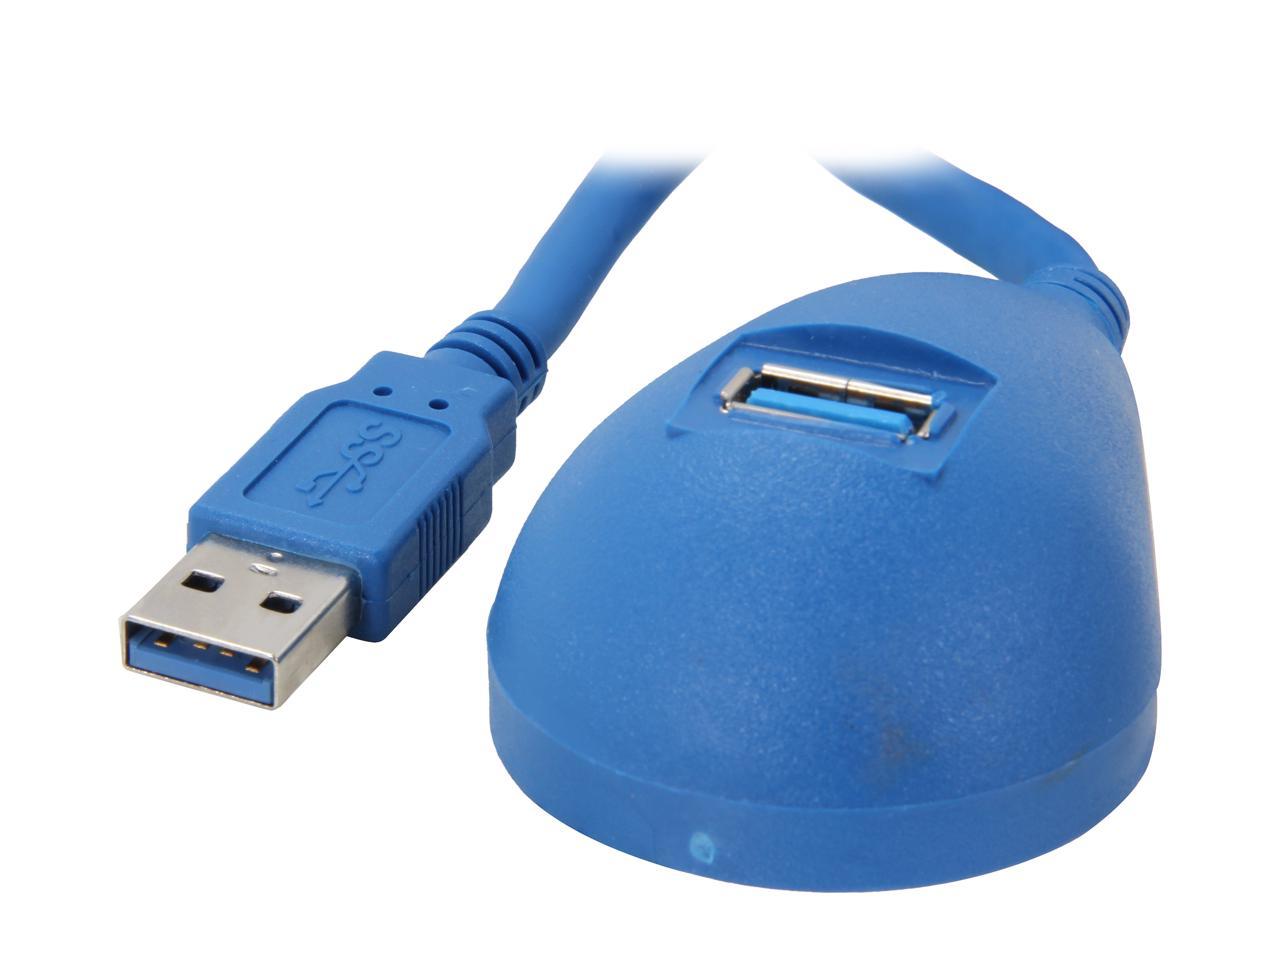 StarTech.com USB3SEXT5DSK Blue Desktop SuperSpeed USB 3.0 Extension Cable - A to A M/F